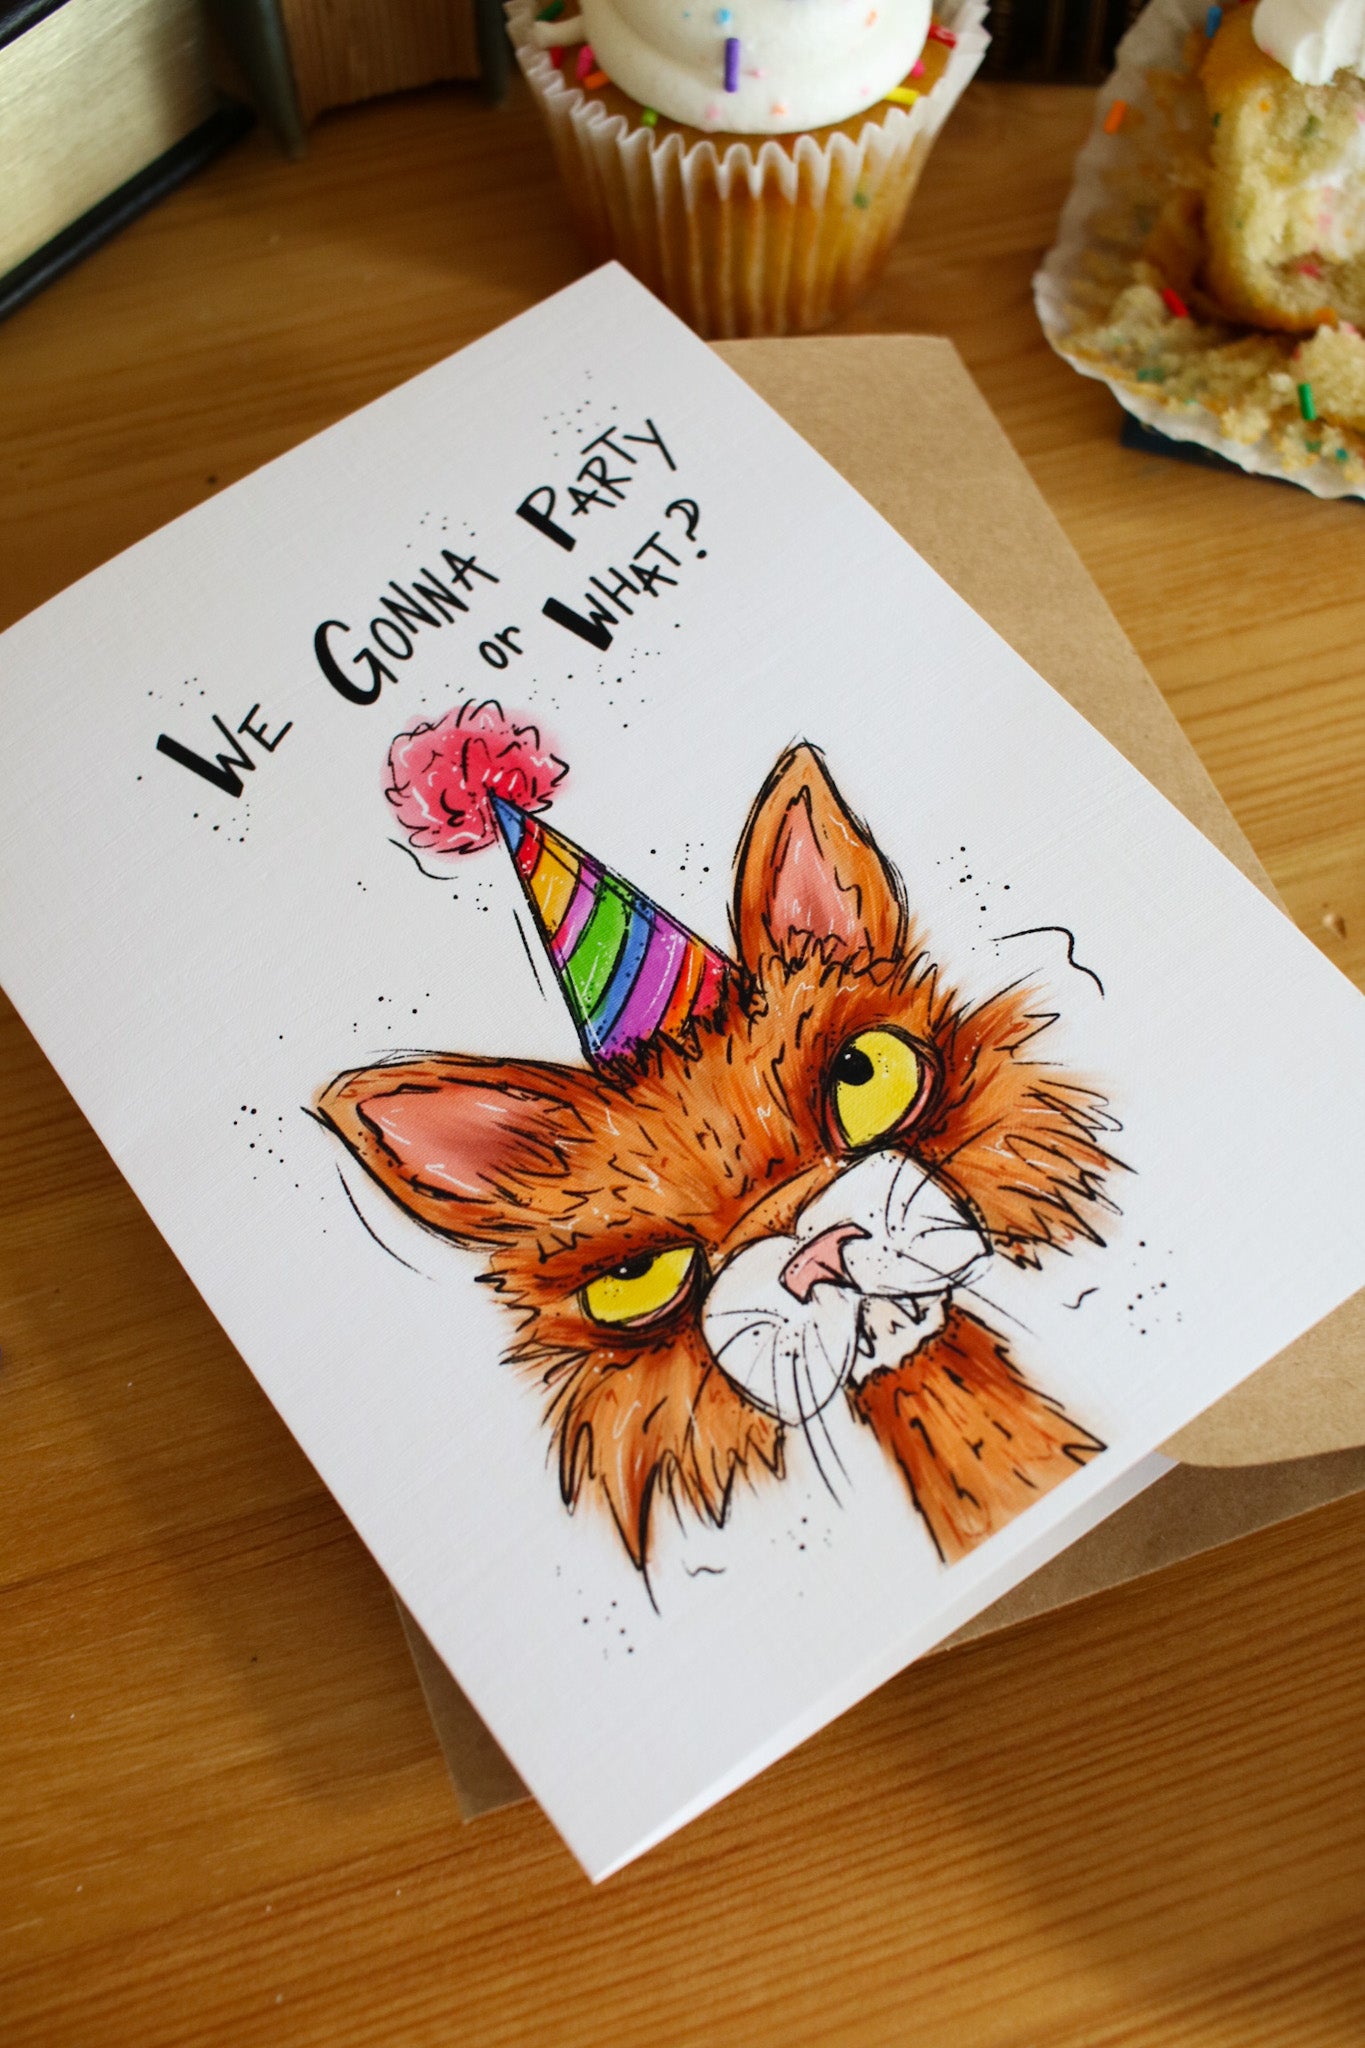 We Gonna Party Or What?! - Greeting Card